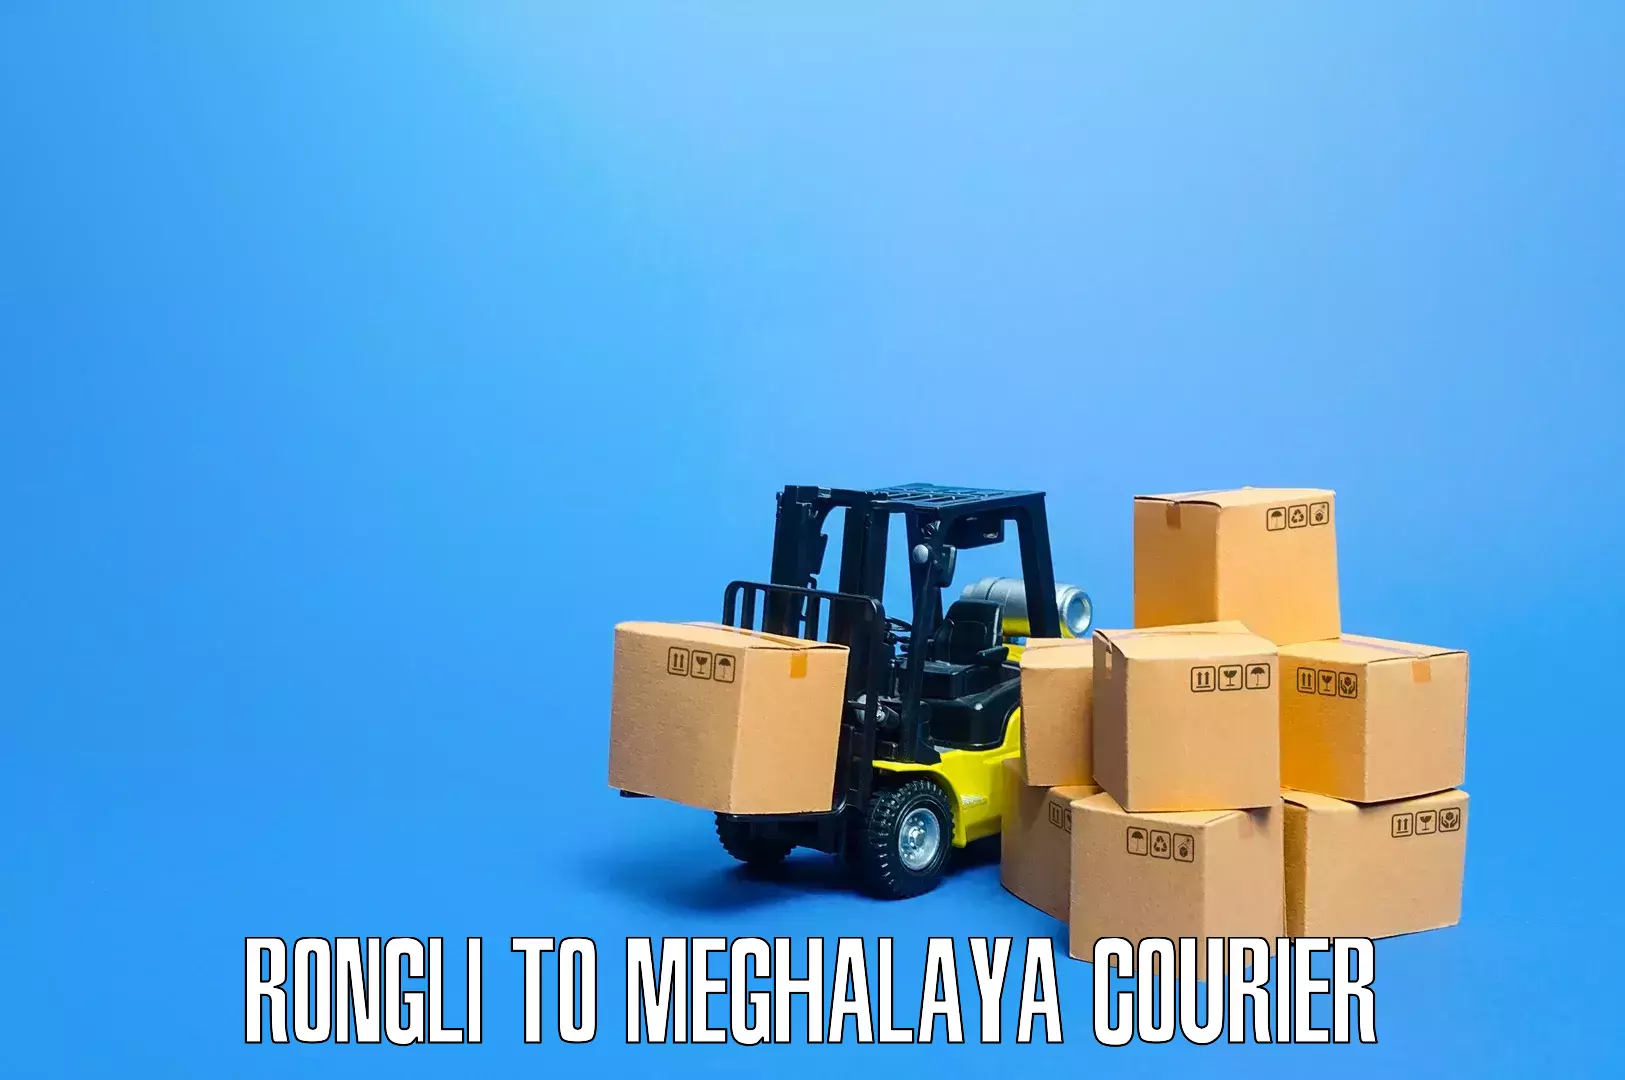 Trusted relocation experts Rongli to Meghalaya